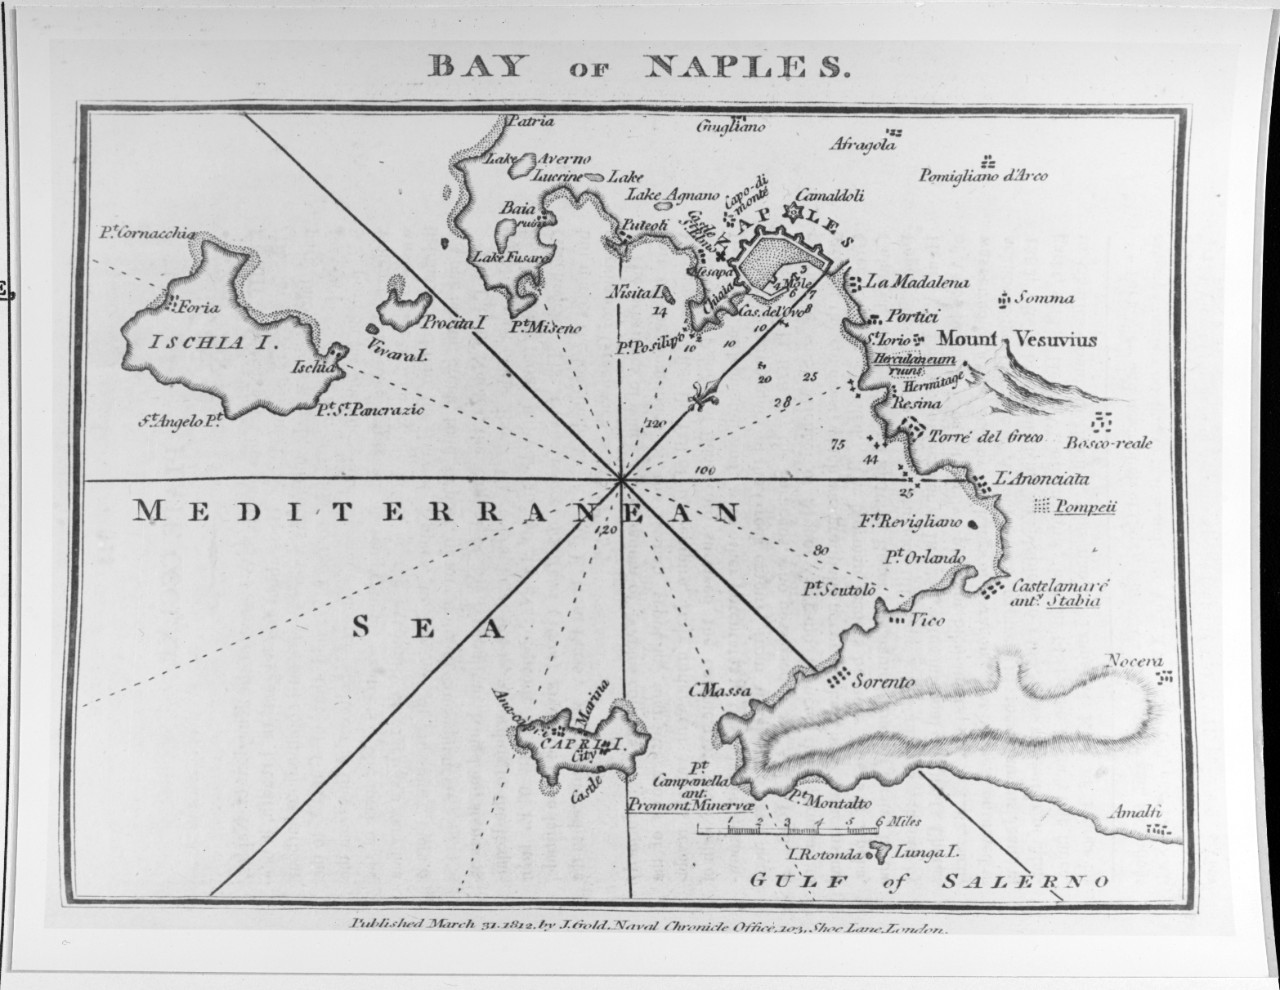 Chart of the Bay of Naples, Italy